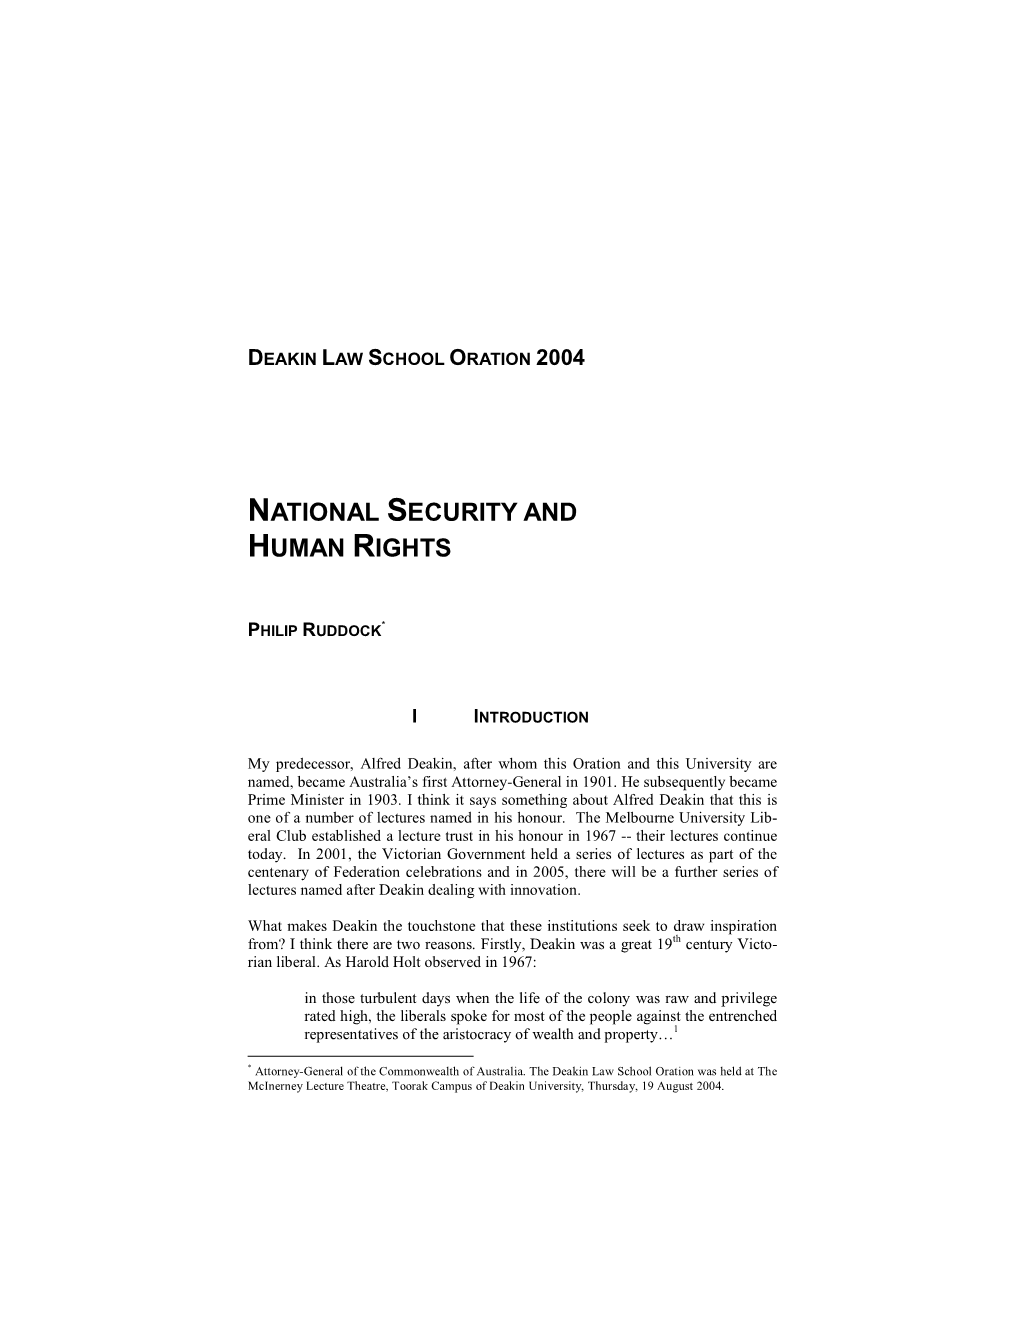 National Security and Human Rights